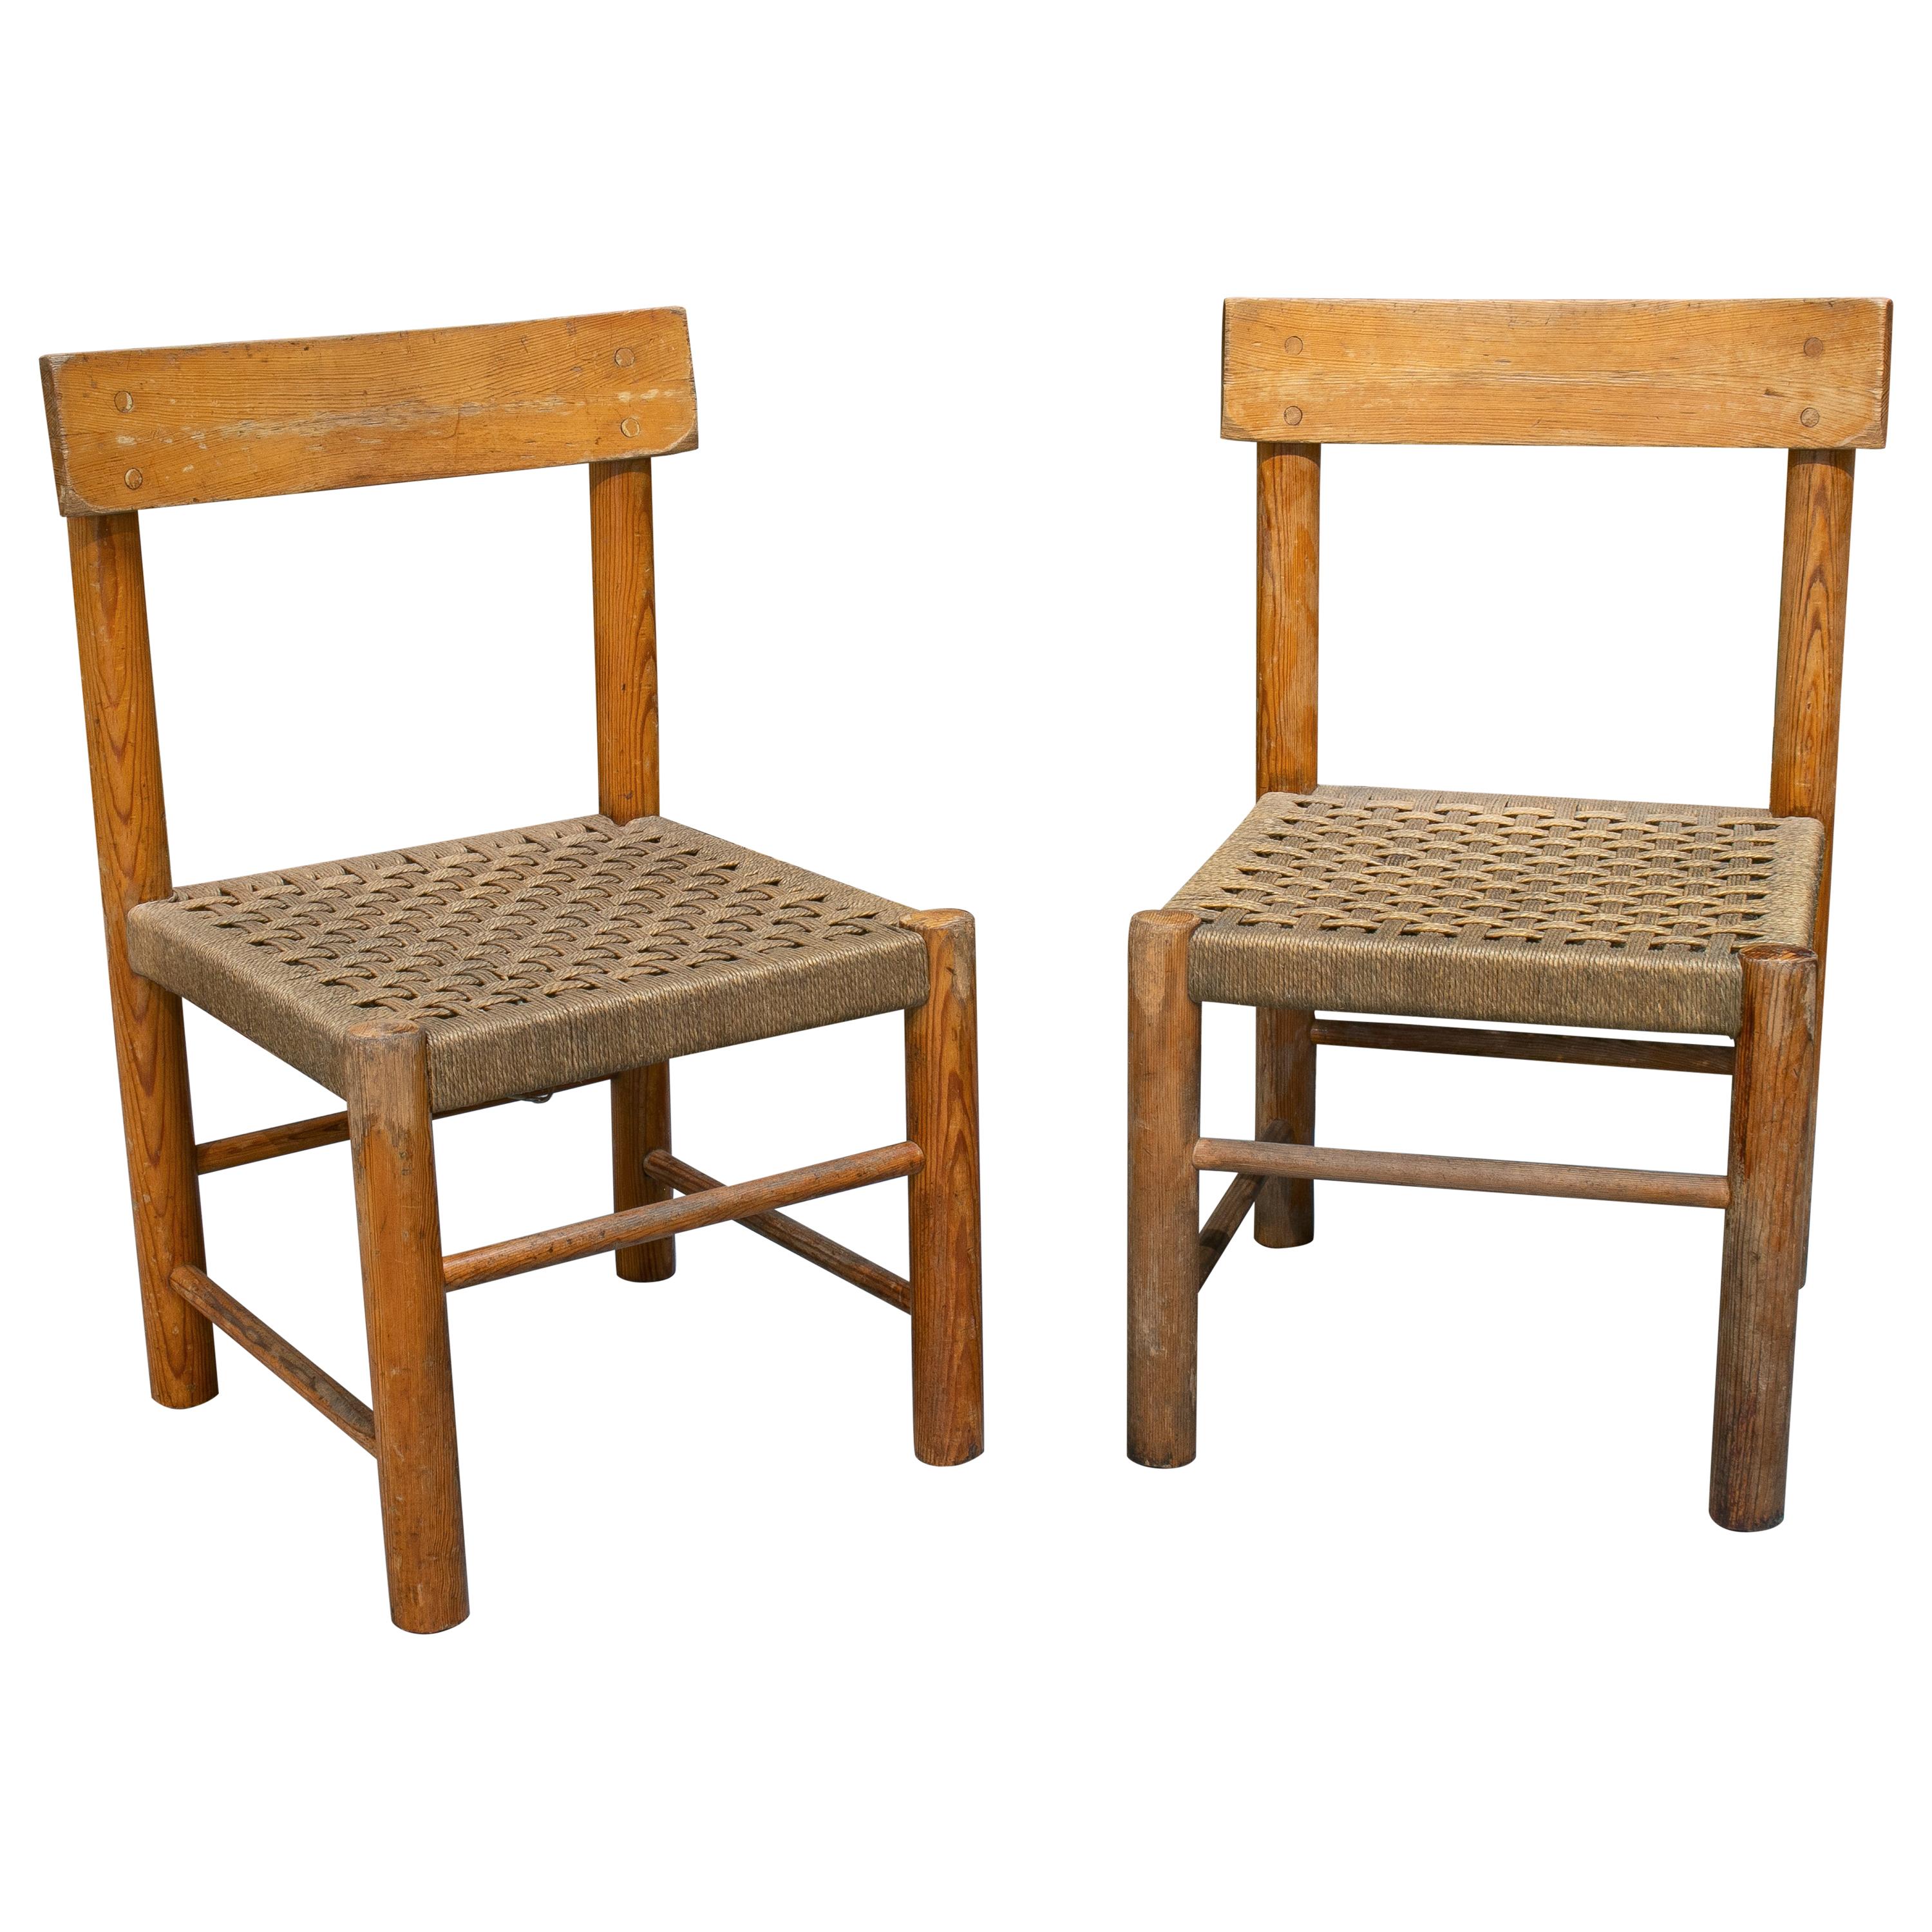 1970s Pair of Spanish Chairs with Woven Wicker Seats For Sale